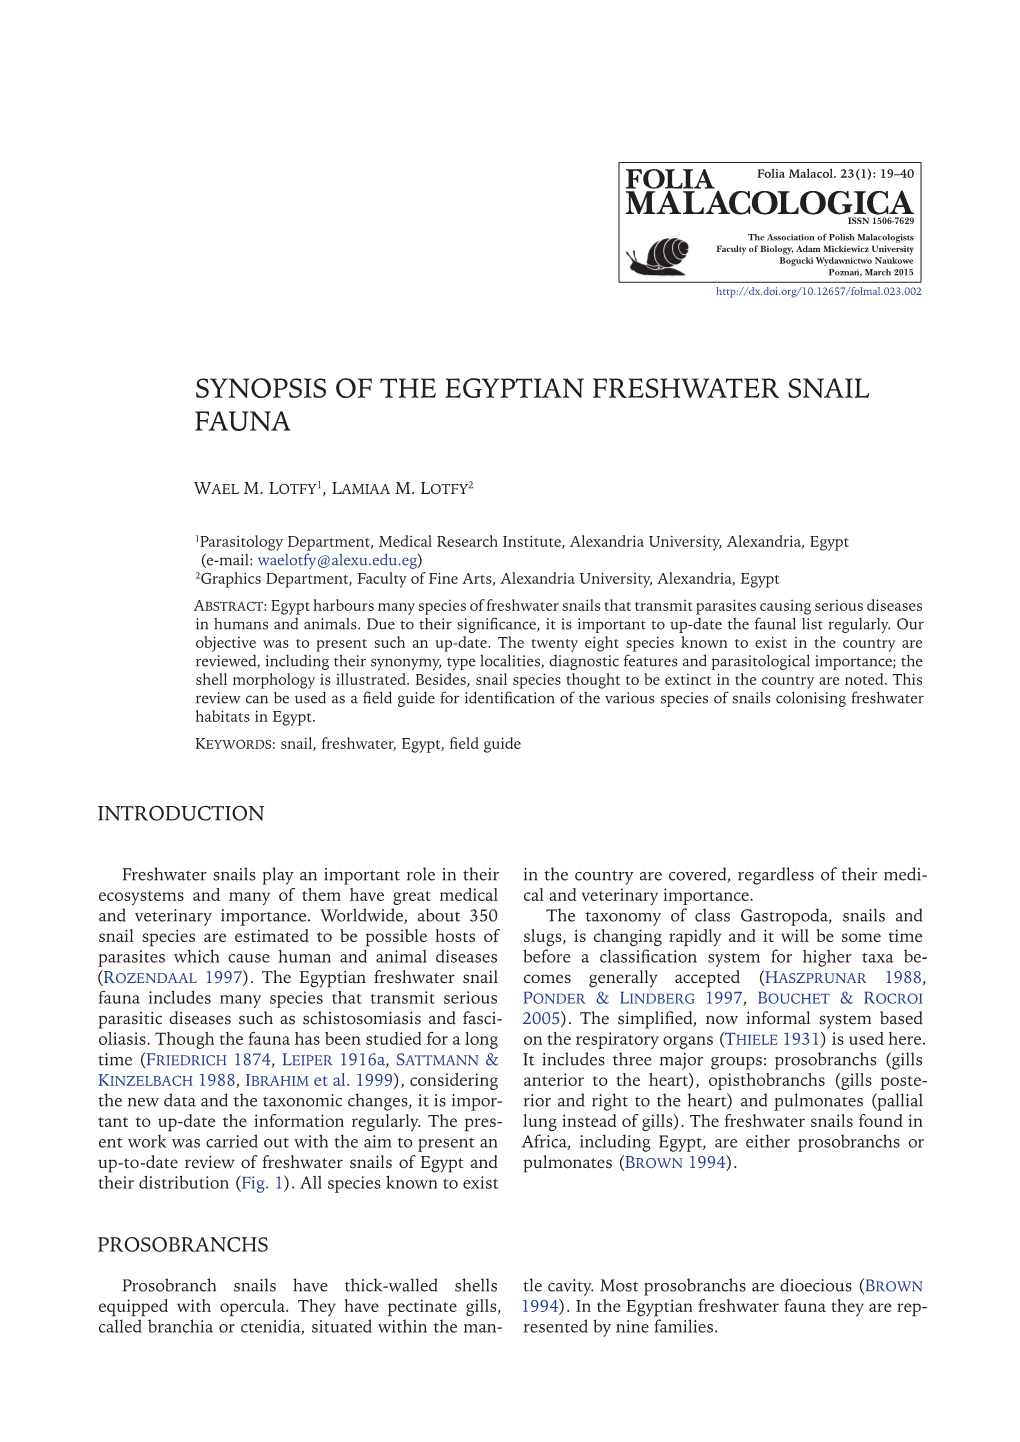 Synopsis of the Egyptian Freshwater Snail Fauna